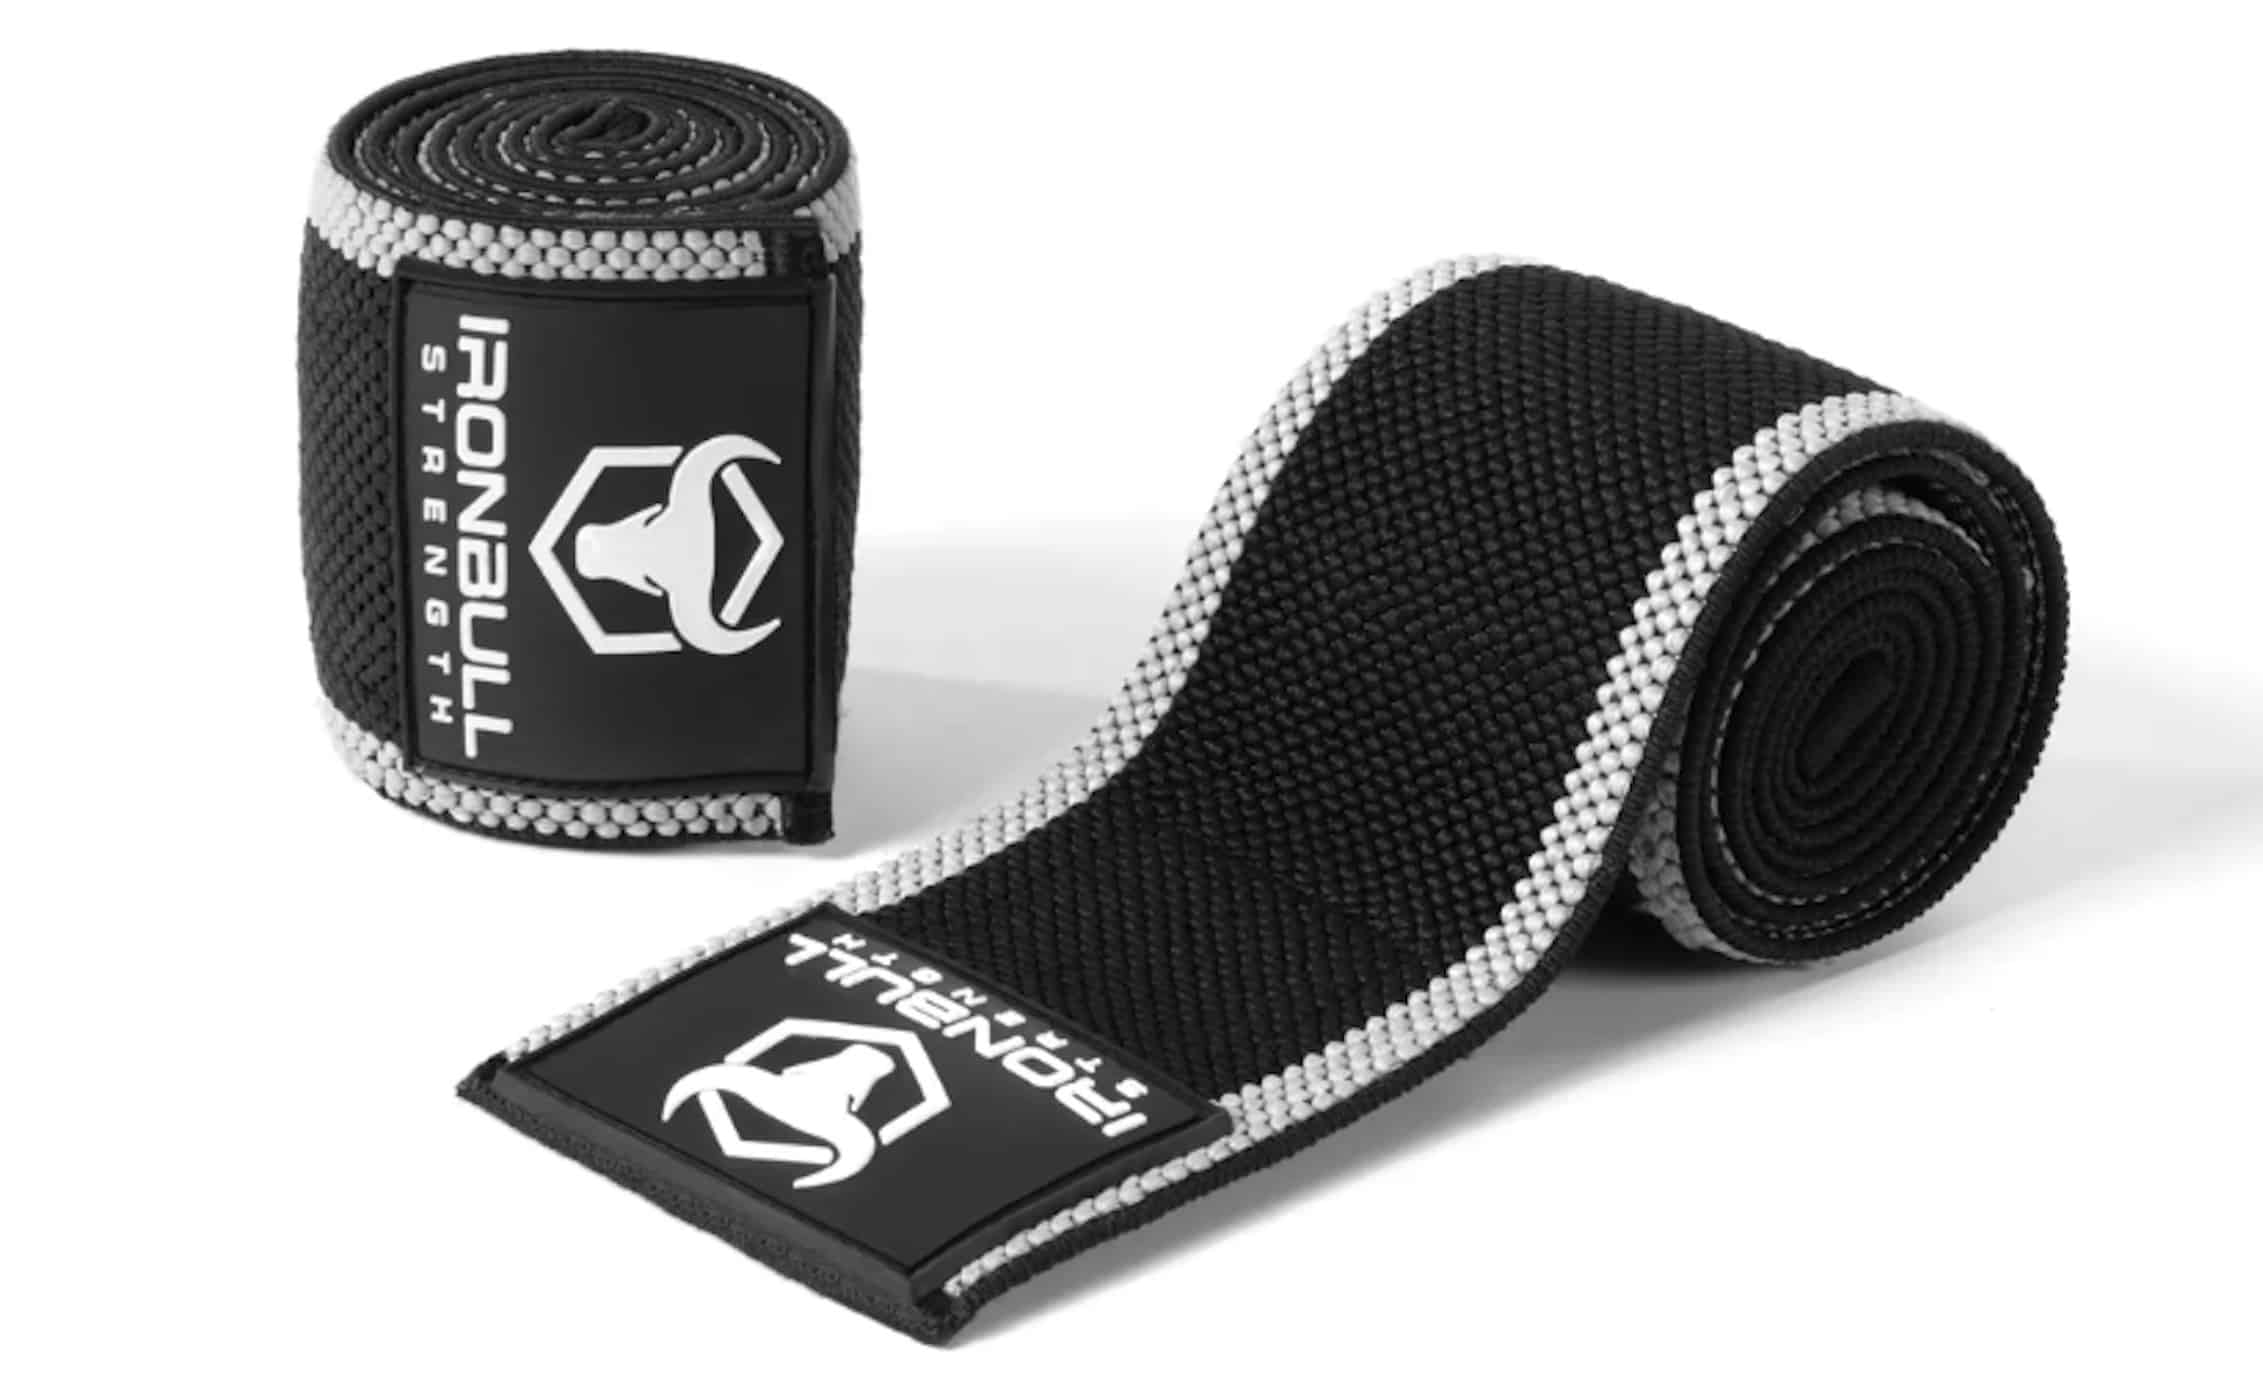 Product Review: Gym Gear – Shred Belt by Ironbull Strength – shred